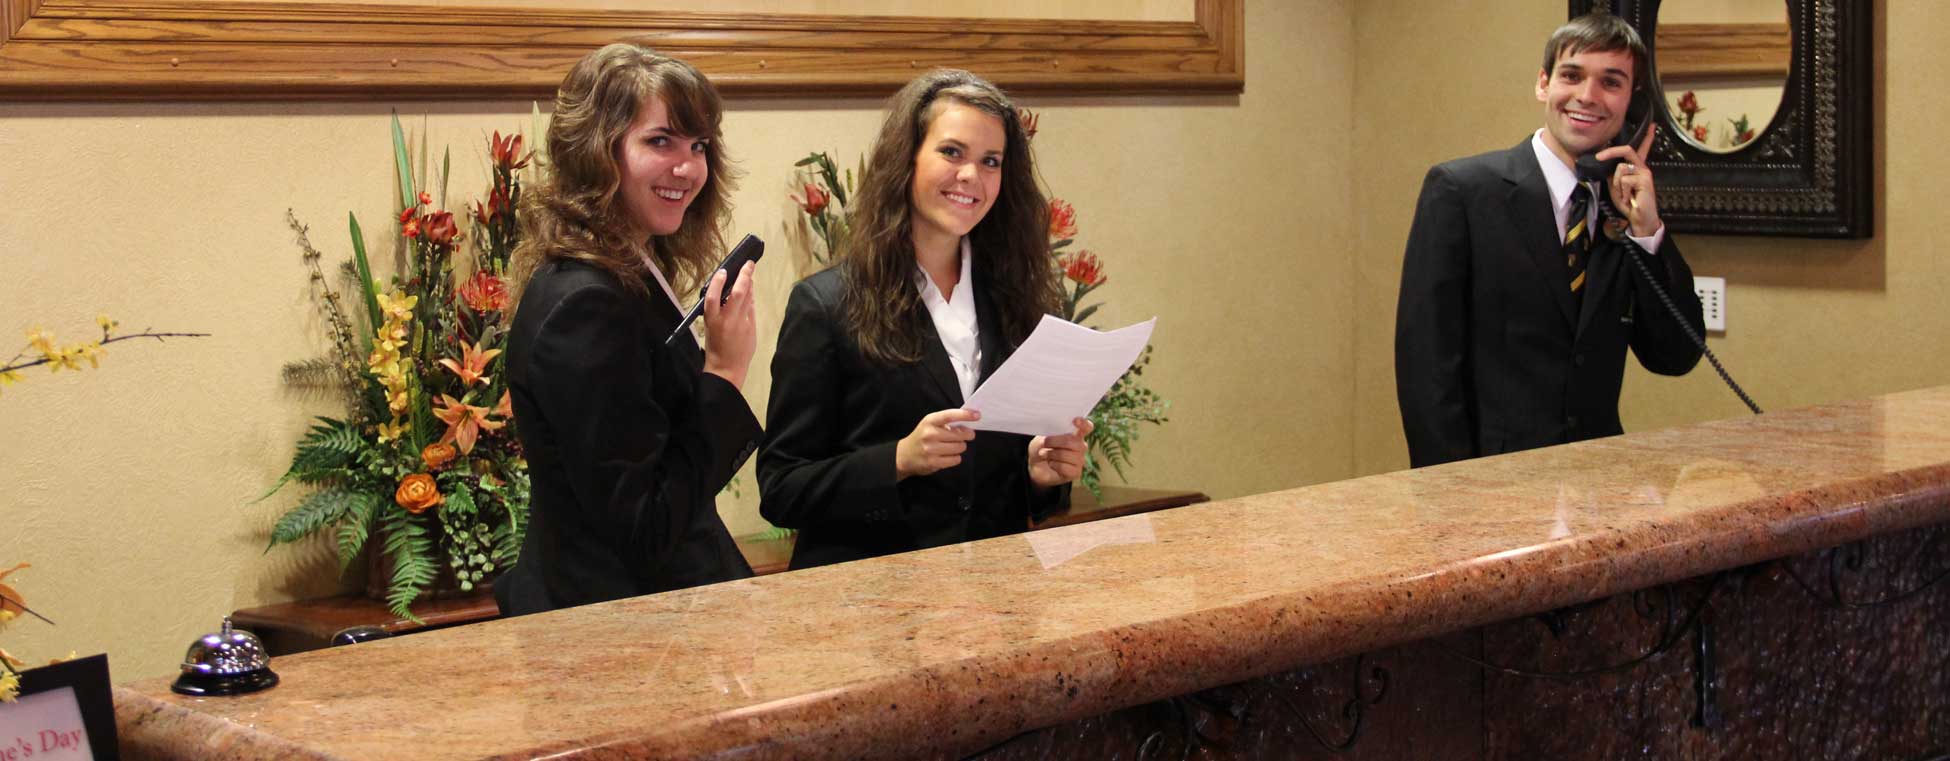 3 students working the front desk